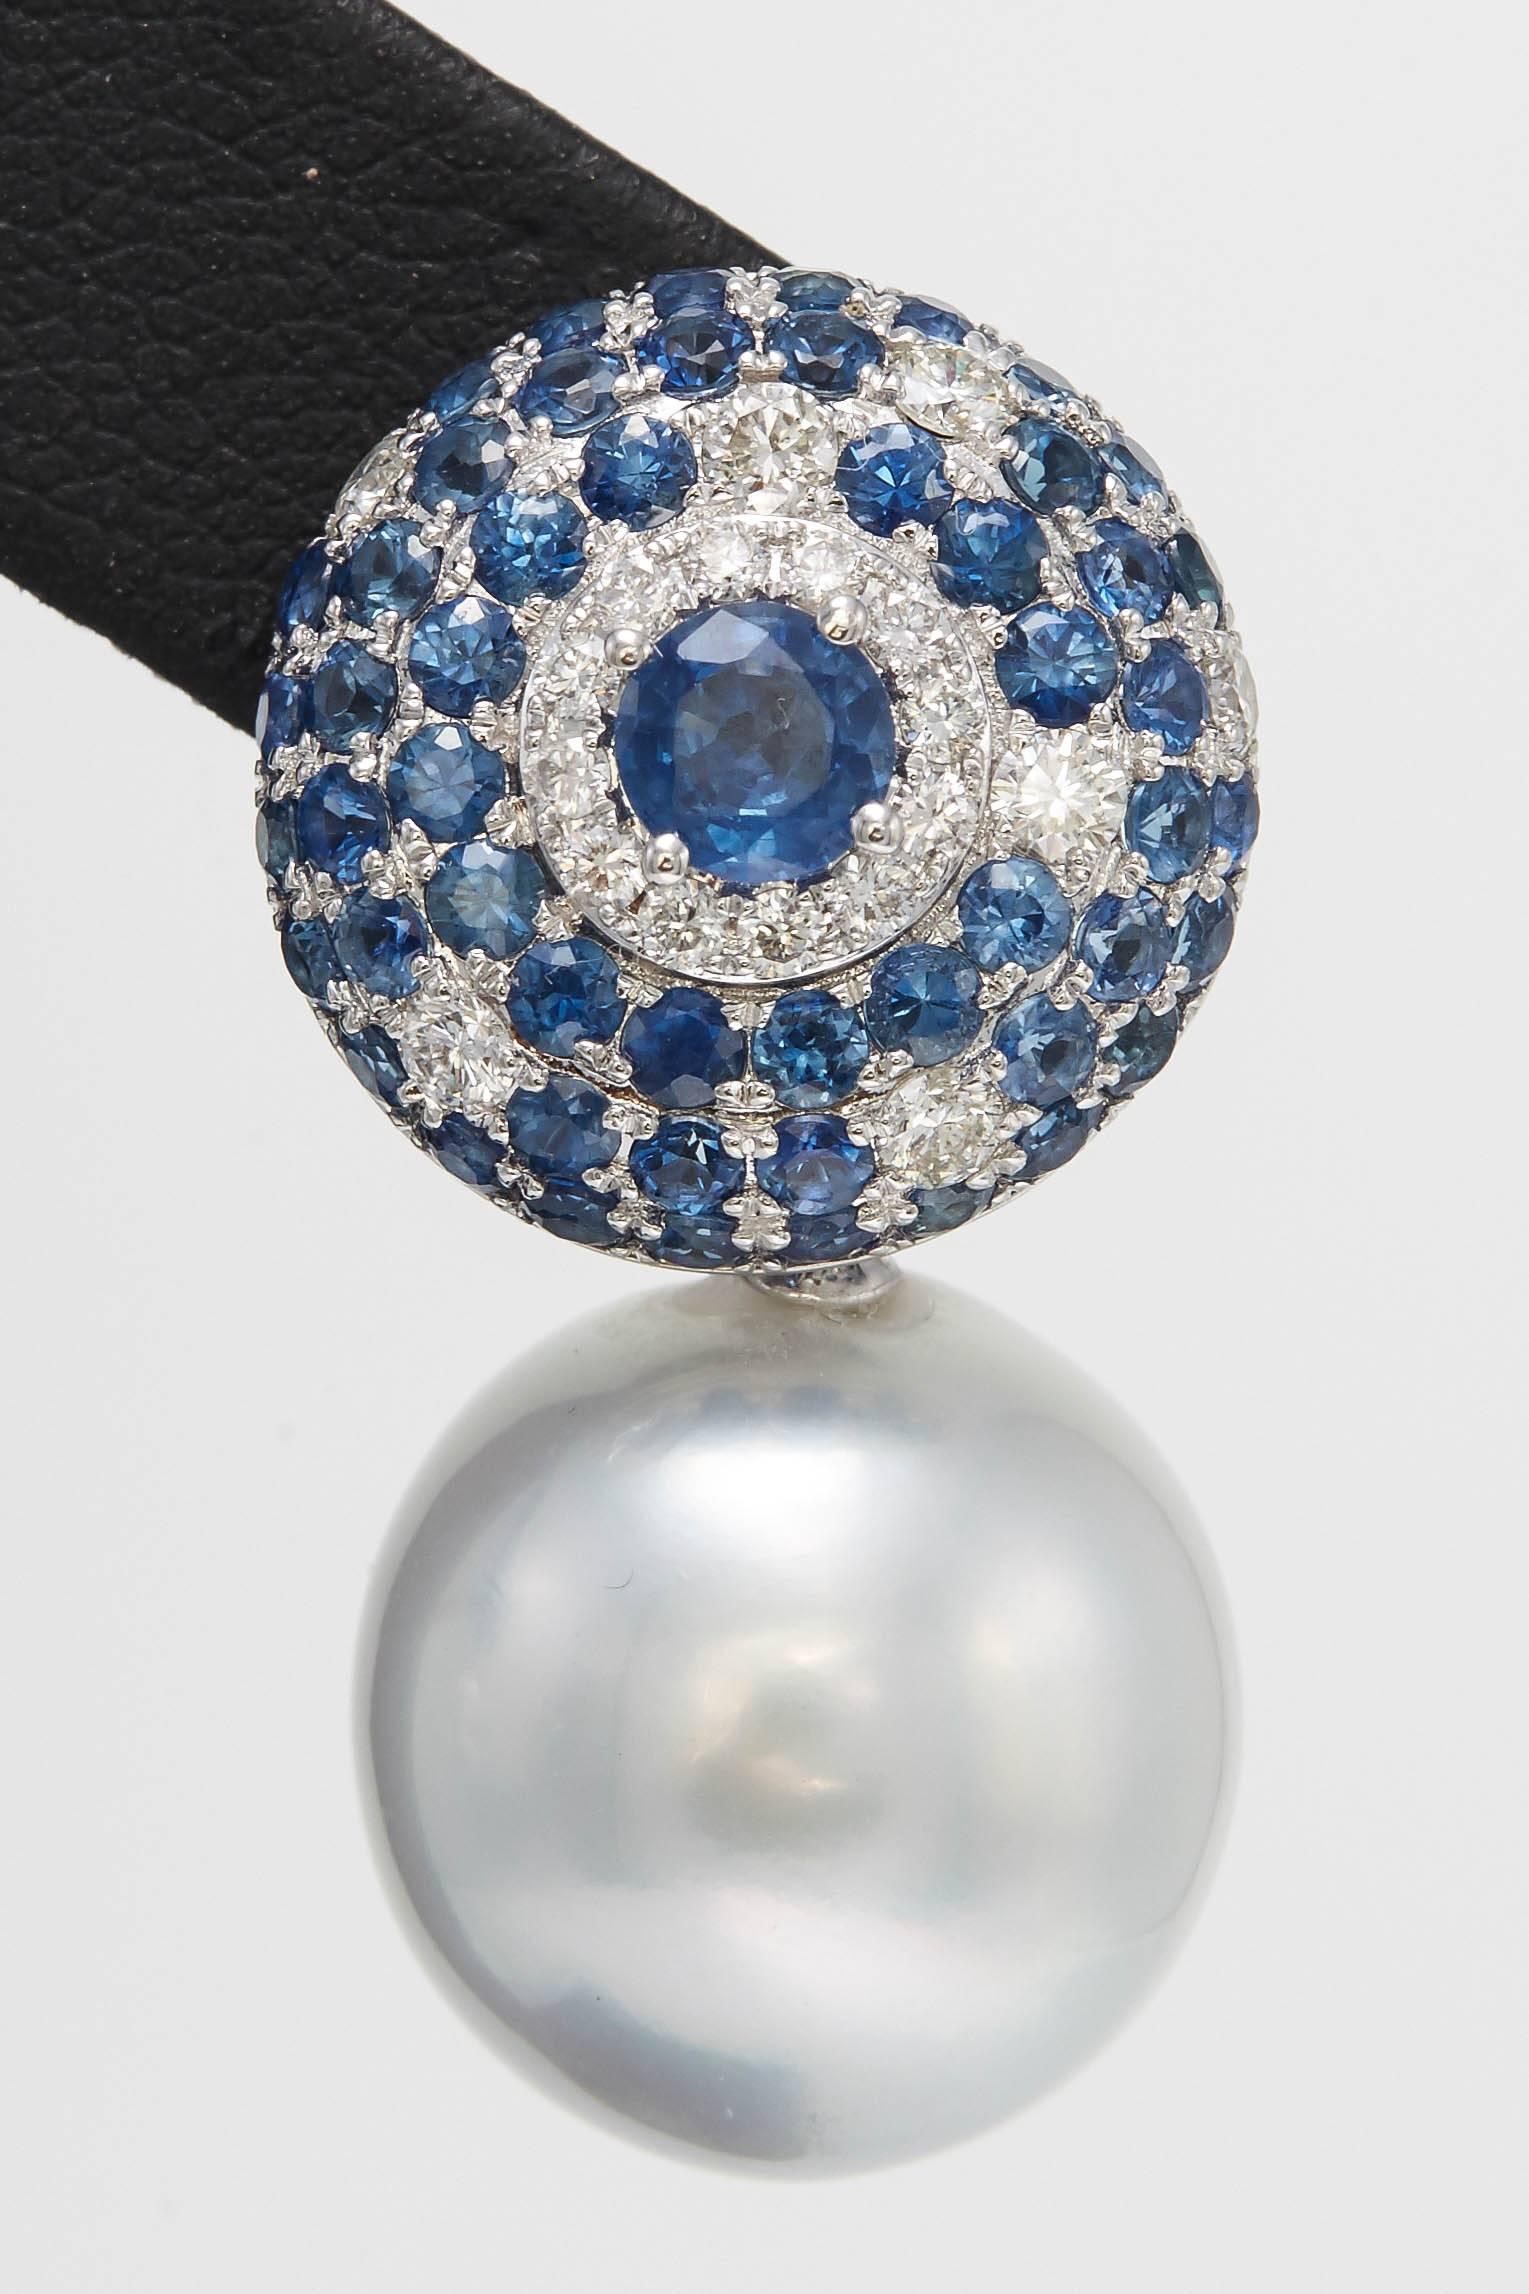 Contemporary South Sea Pearl with Sapphire and Diamond Drop Earrings 5.53 Carats 18K